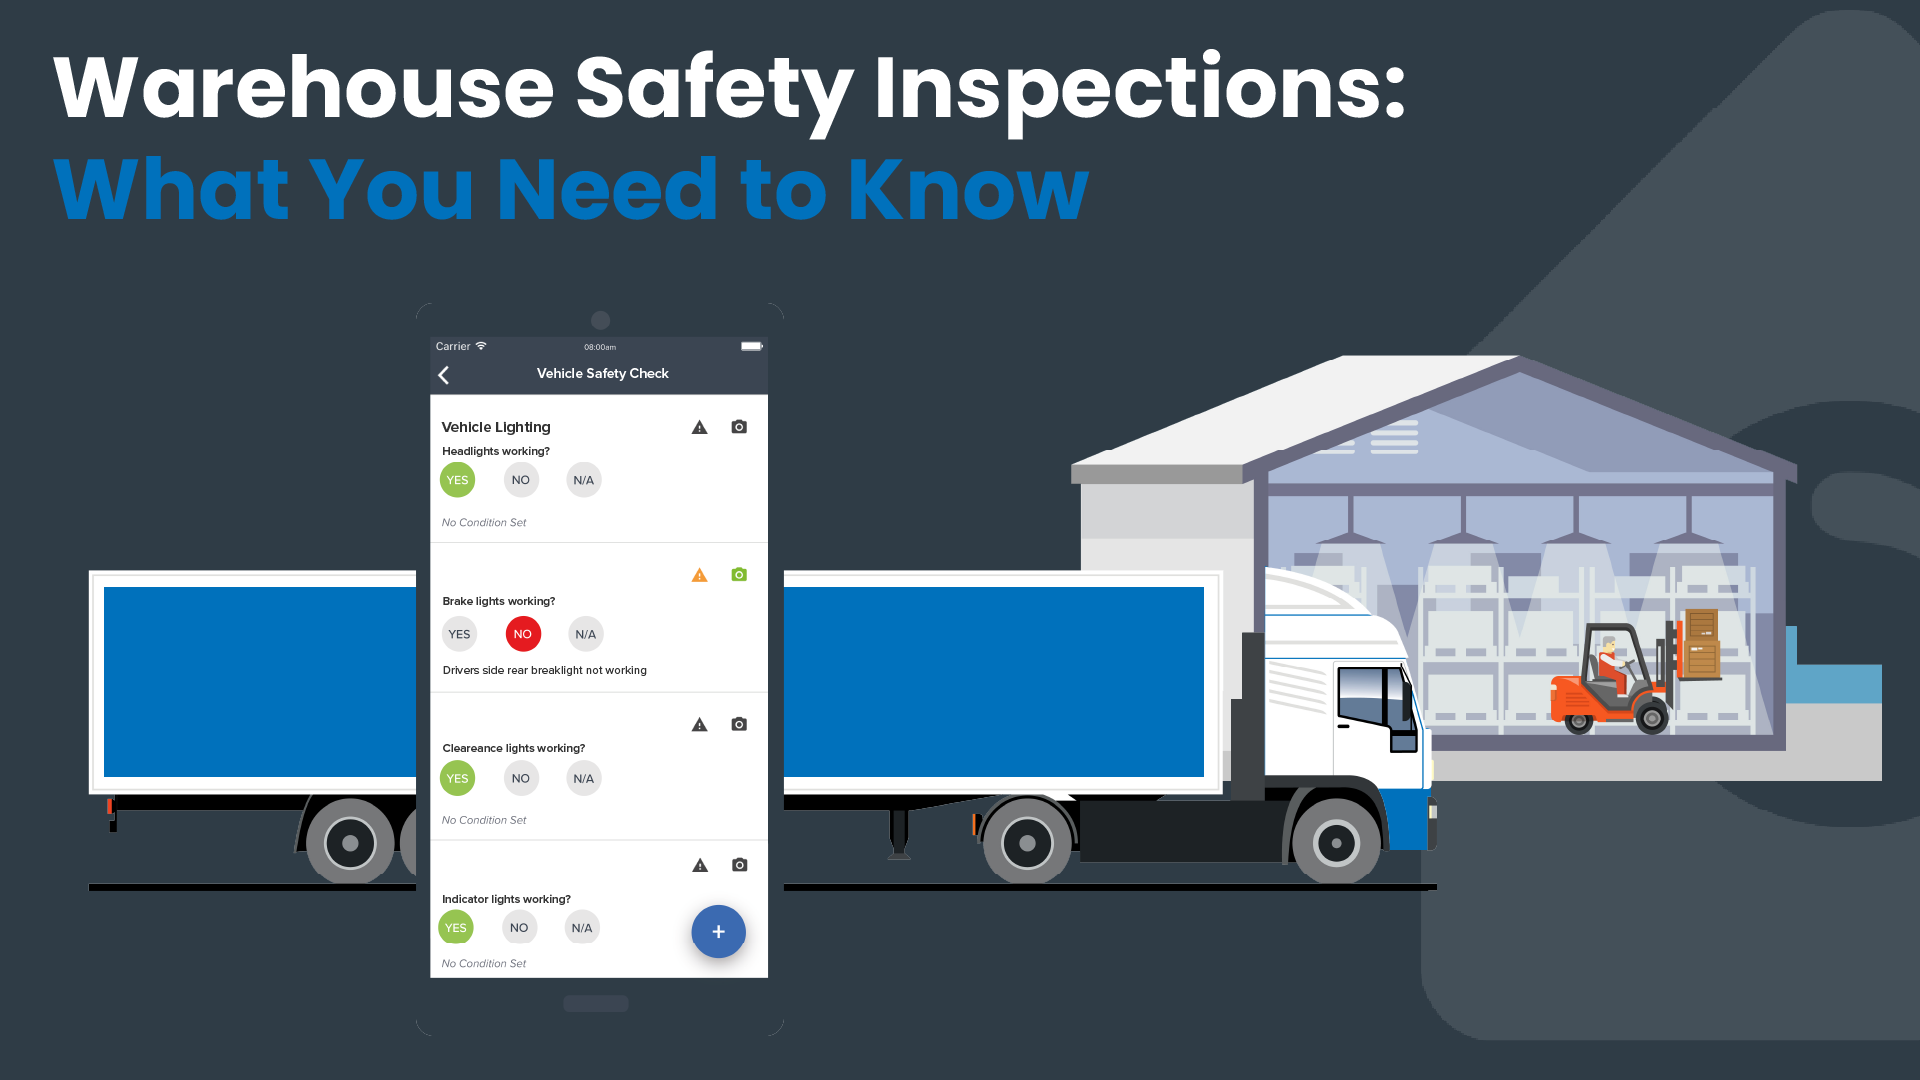 Warehouse Safety Inspections: What You Need to Know